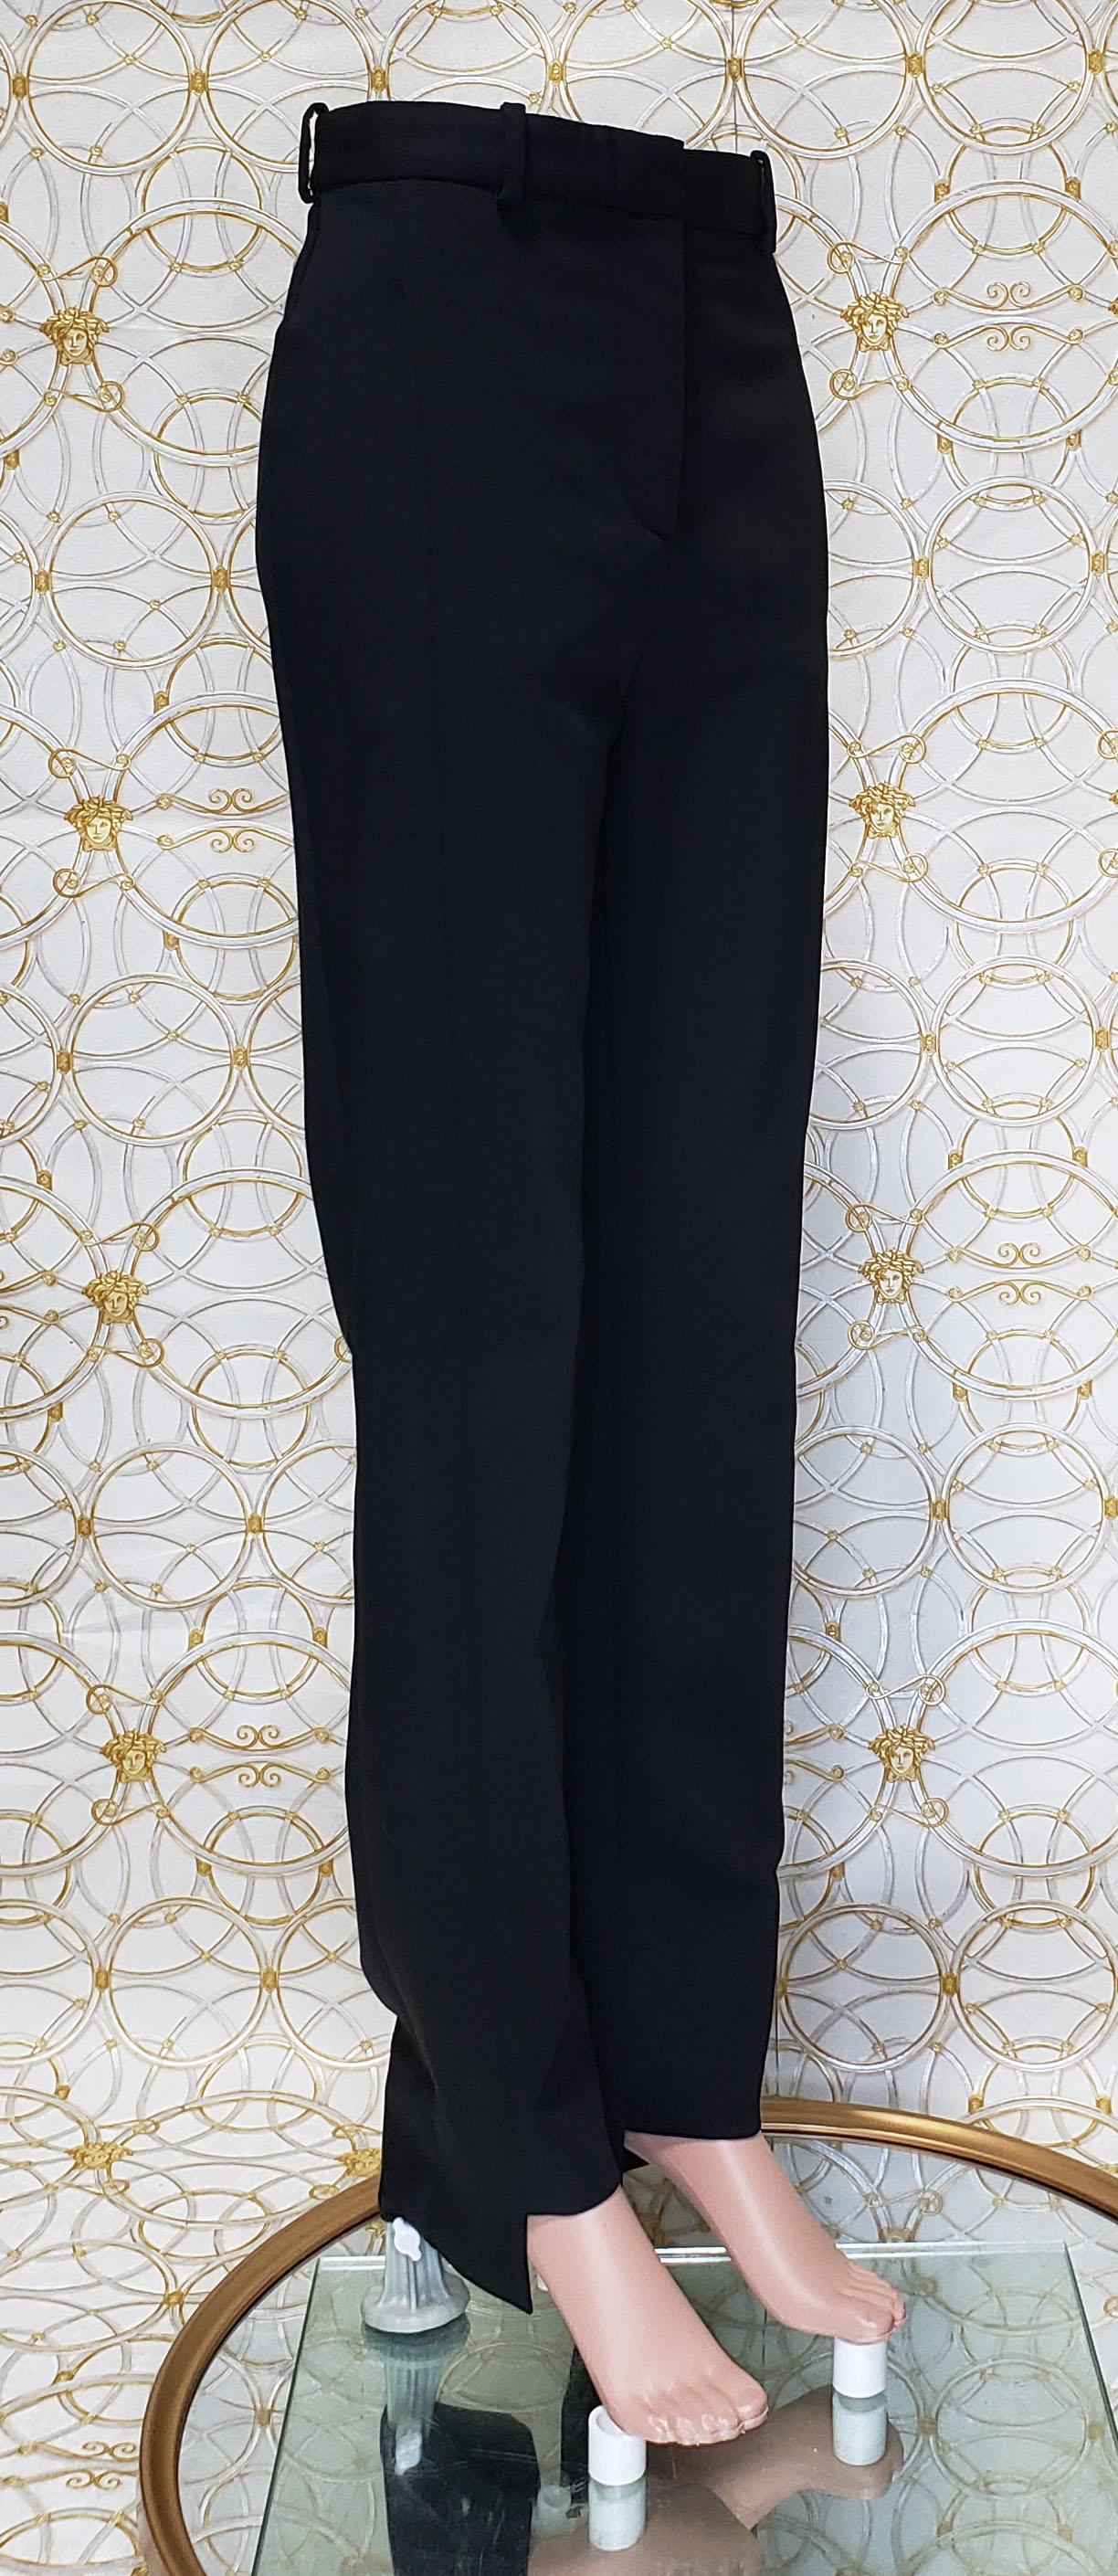 F/W15 Look #48 VERSACE BLACK CLASSIC WOOL PANTS size 38 - 4 For Sale 2